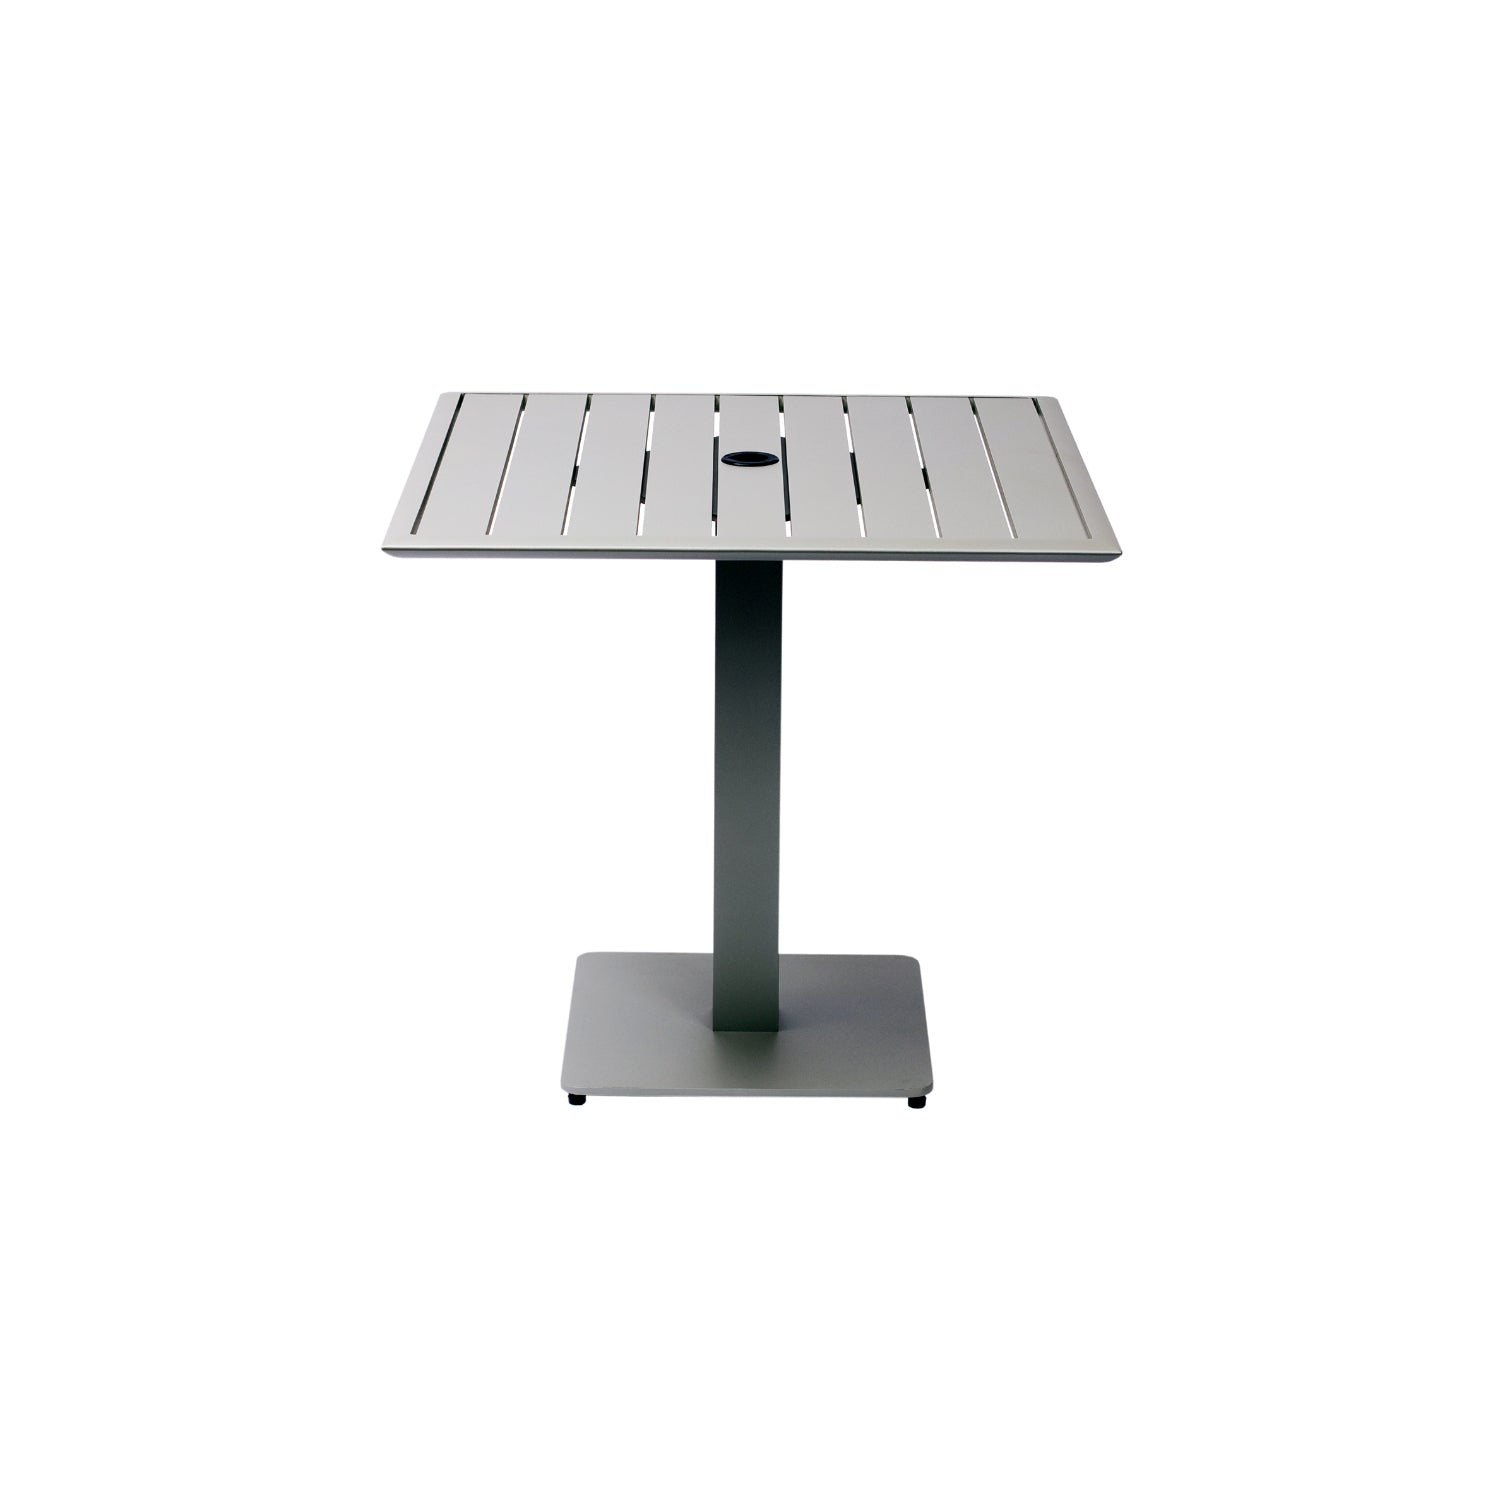 South Beach Collection Outdoor/Indoor 36" Square Titanium Silver Aluminum Dining Height Table with Umbrella Hole